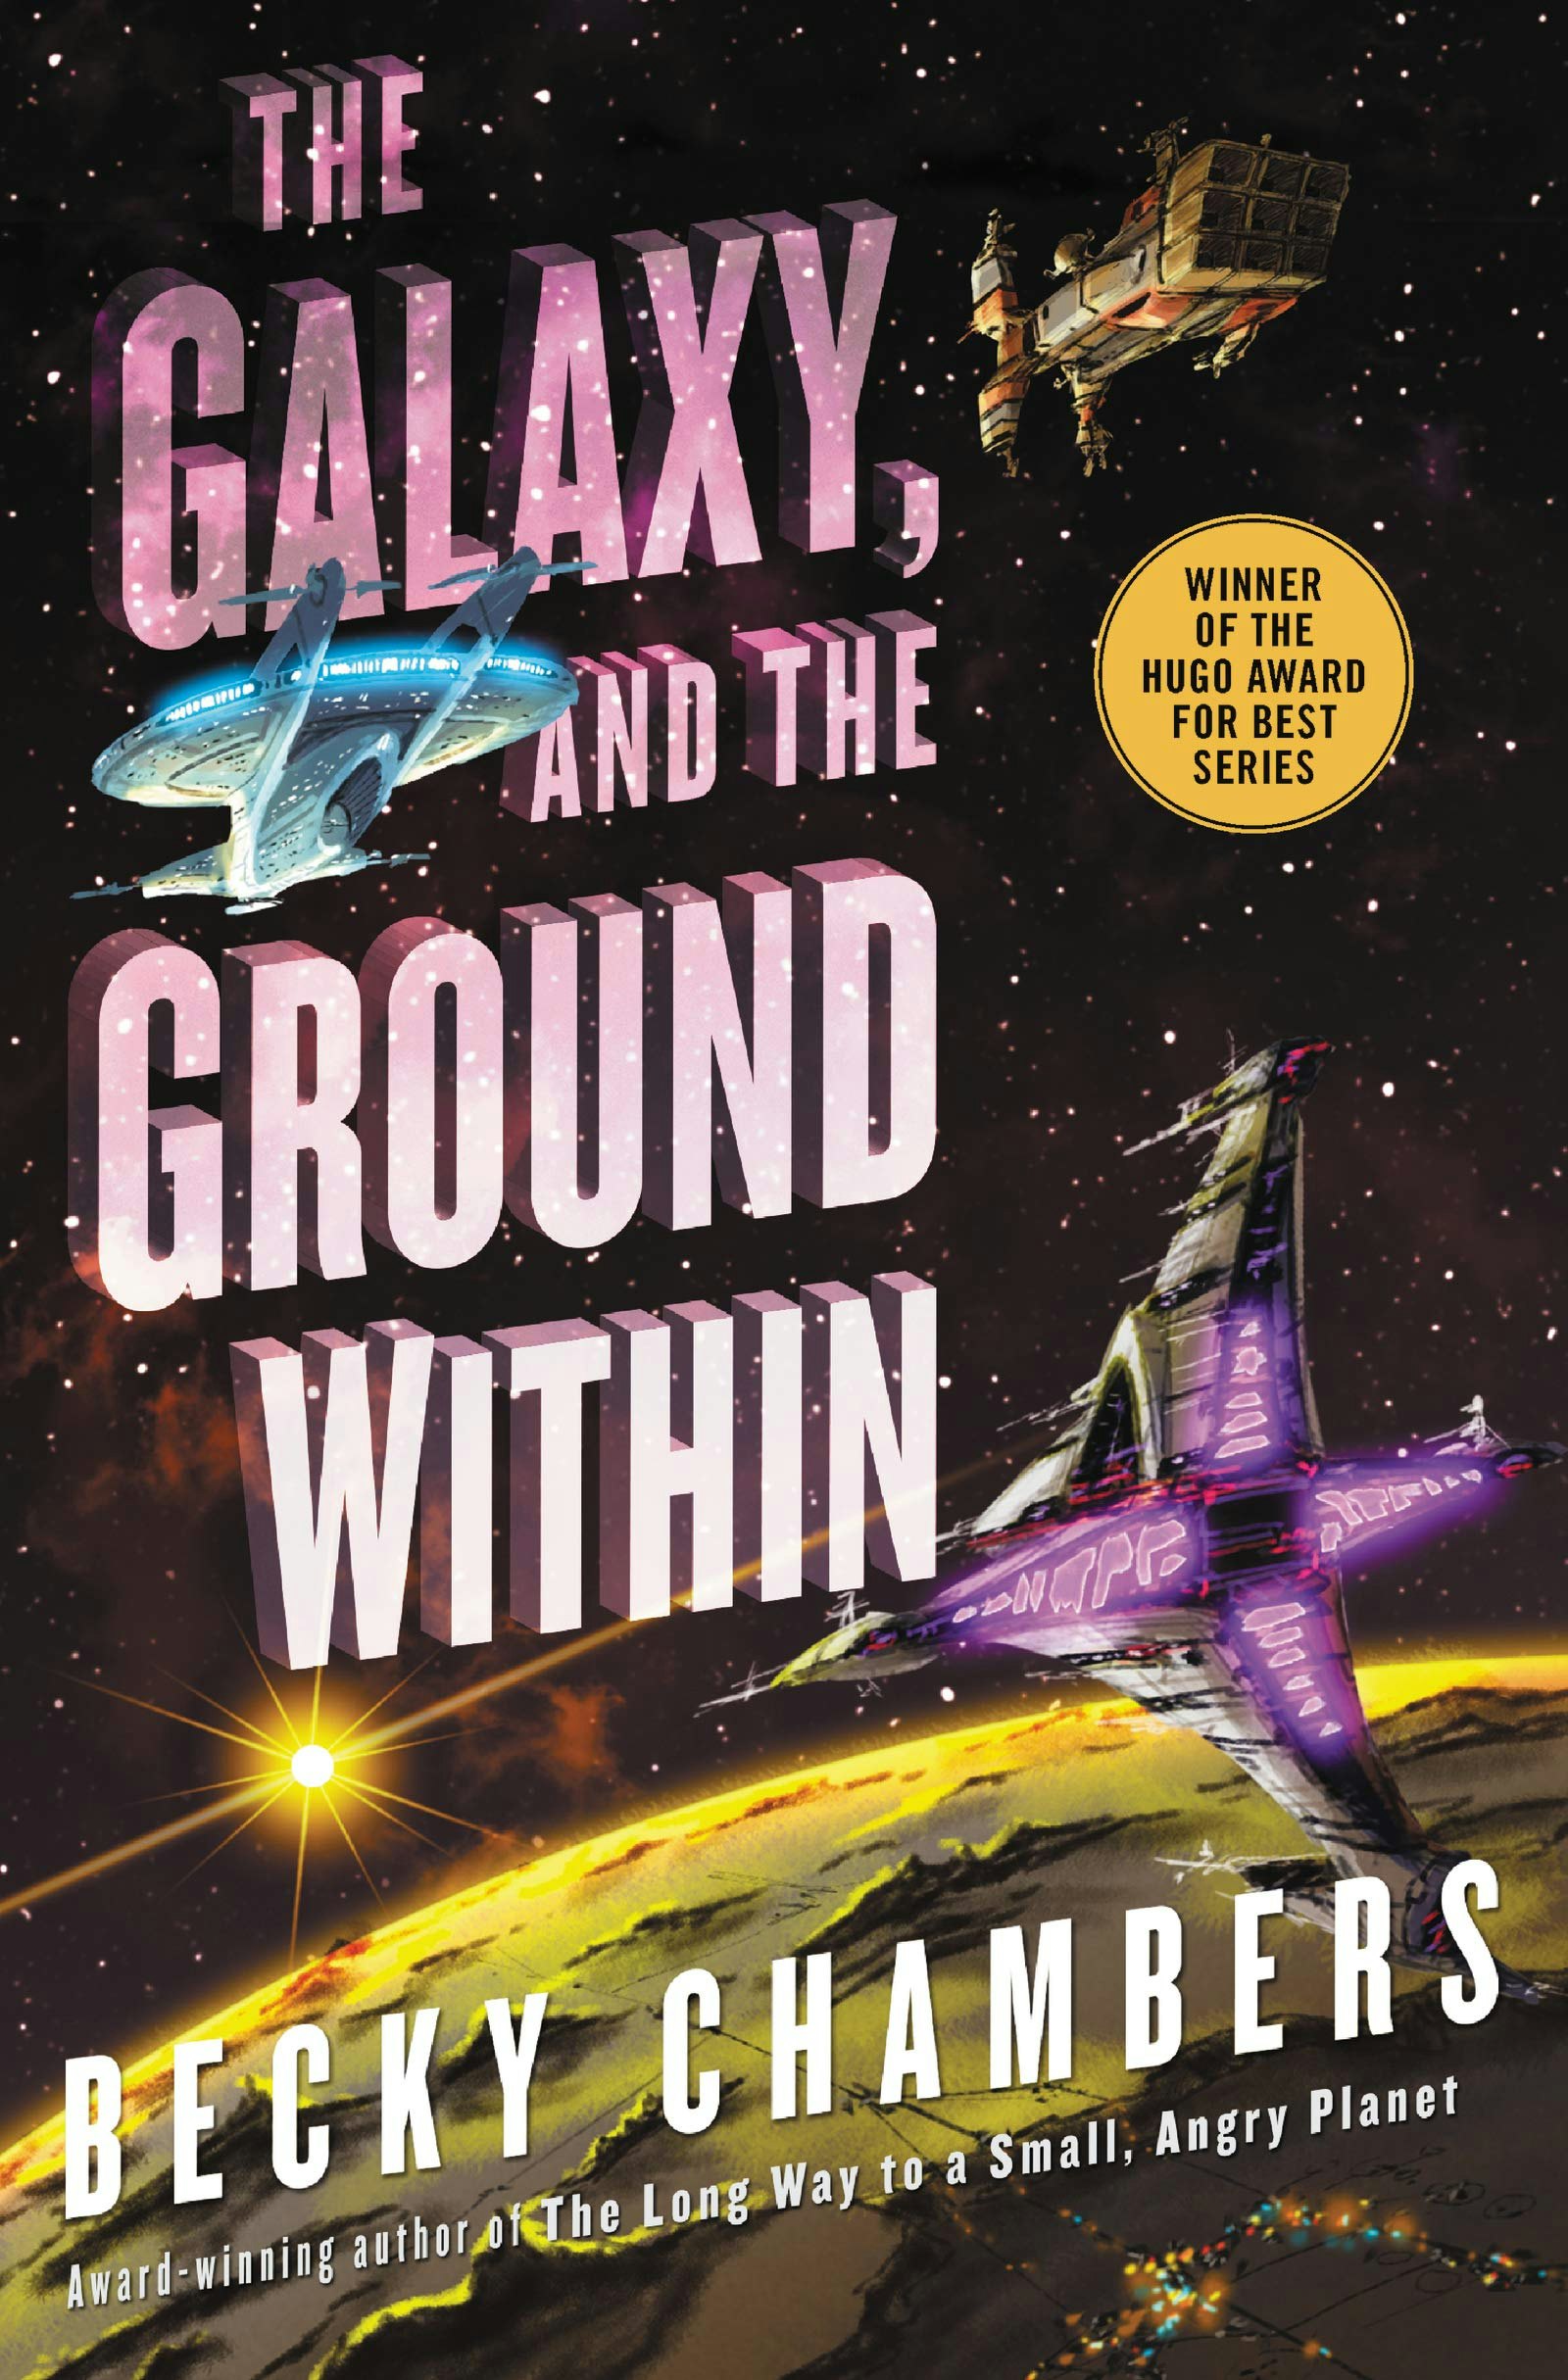 the galaxy and the ground within characters